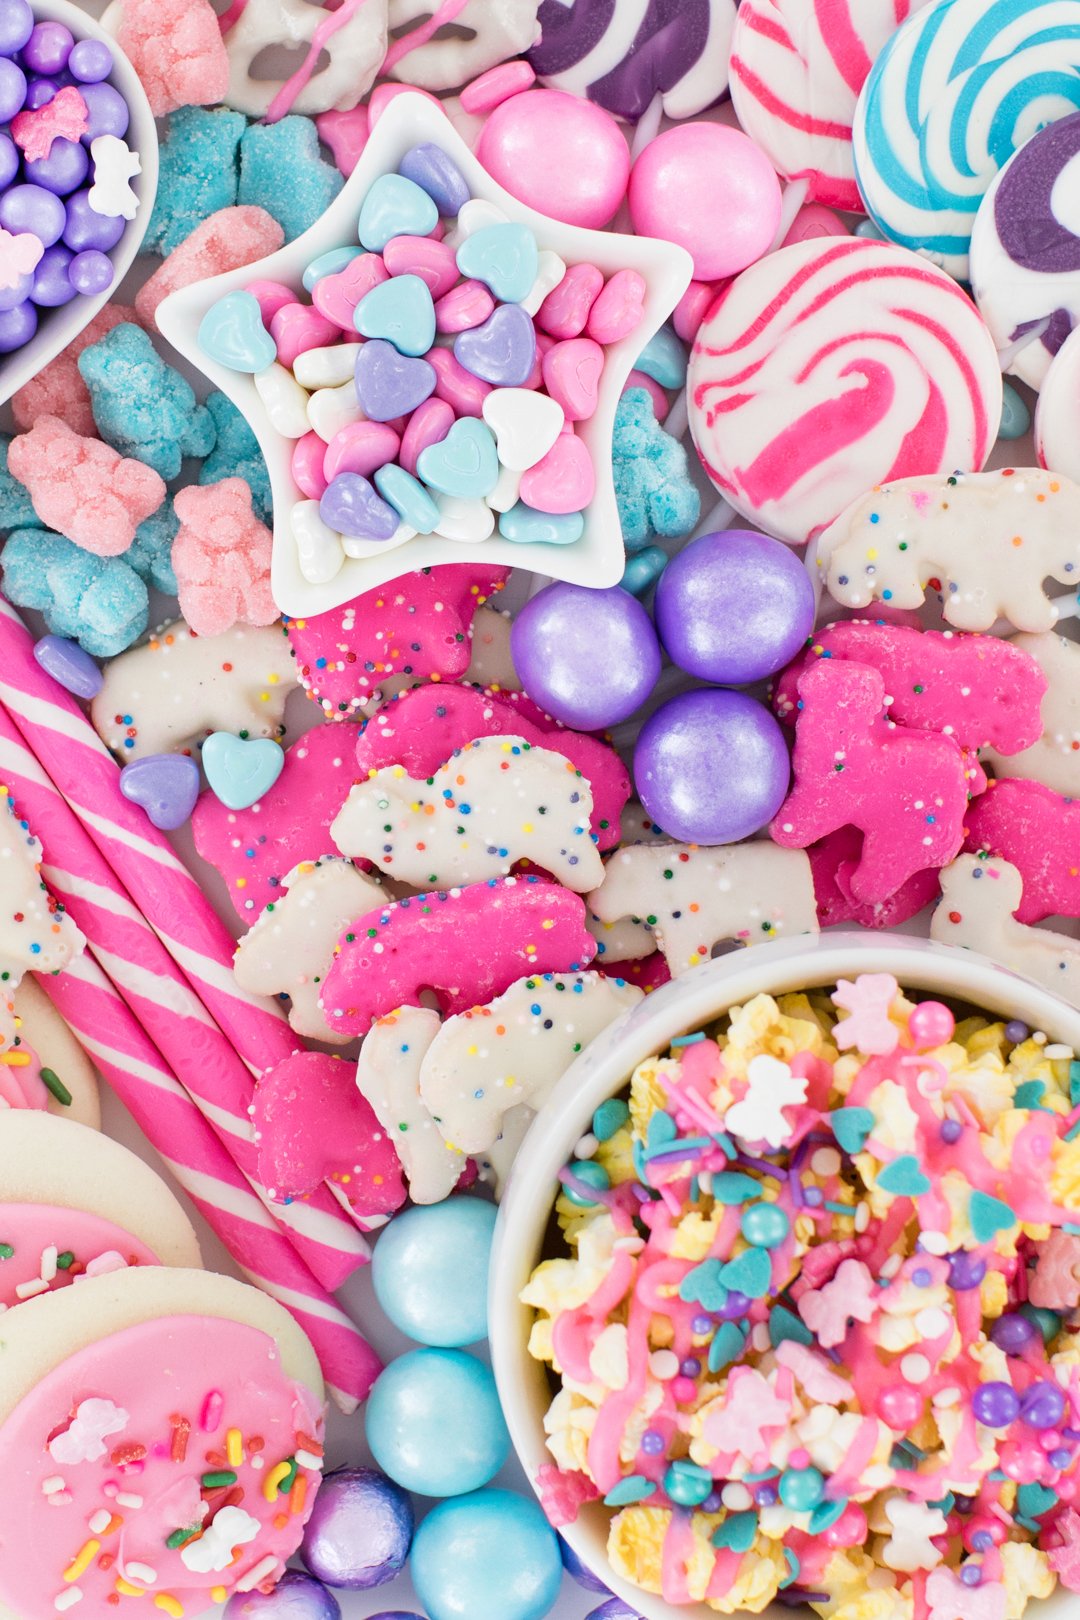 Tray filled with pastel candies, gumballs, cookies, pastel popcorn.